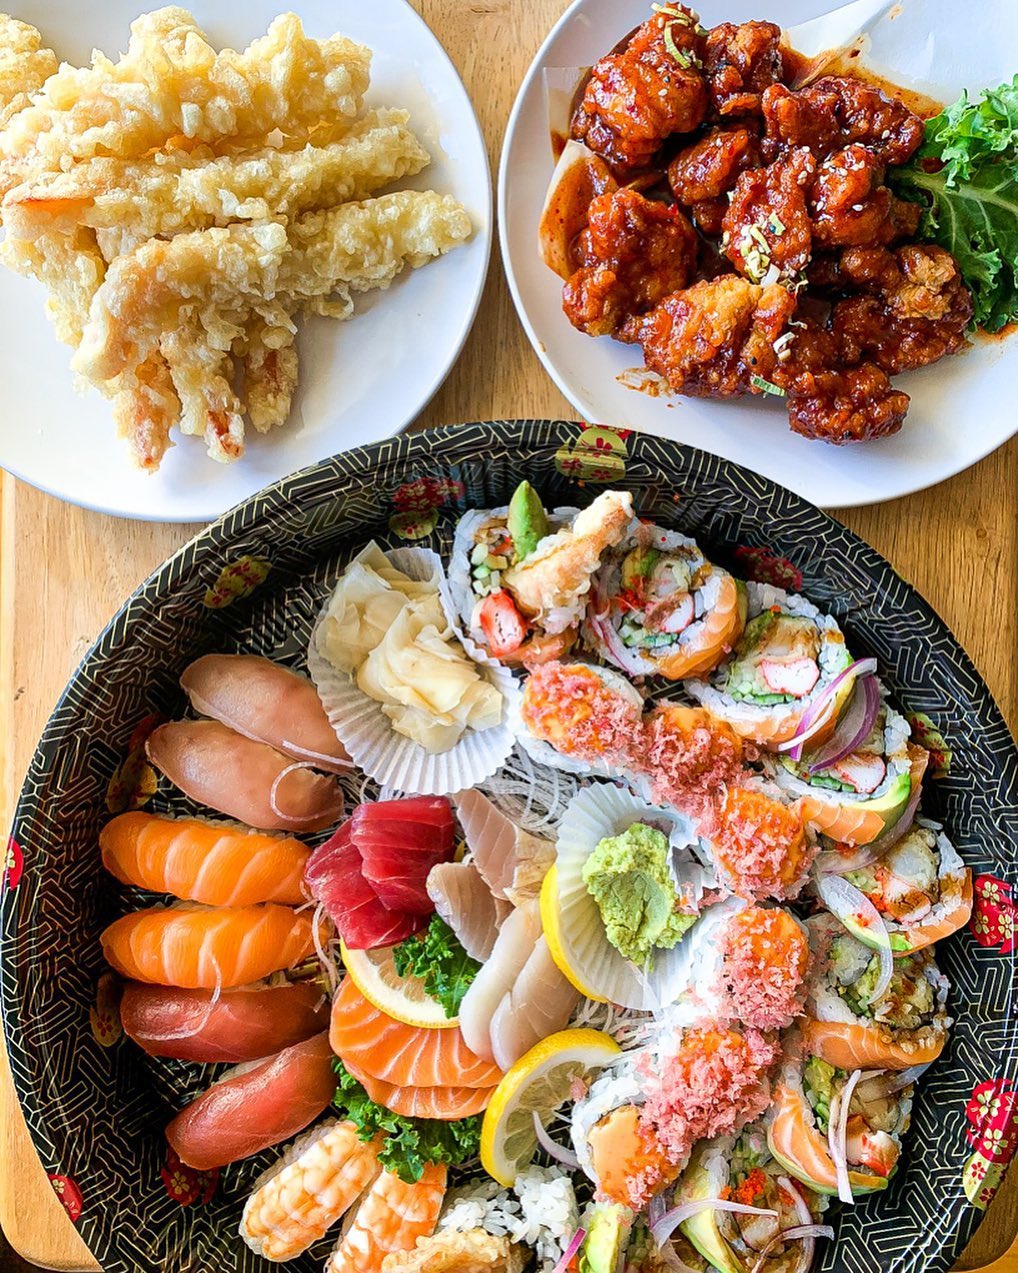 Variety of sushi in take-out containers from Kibo Sushi House